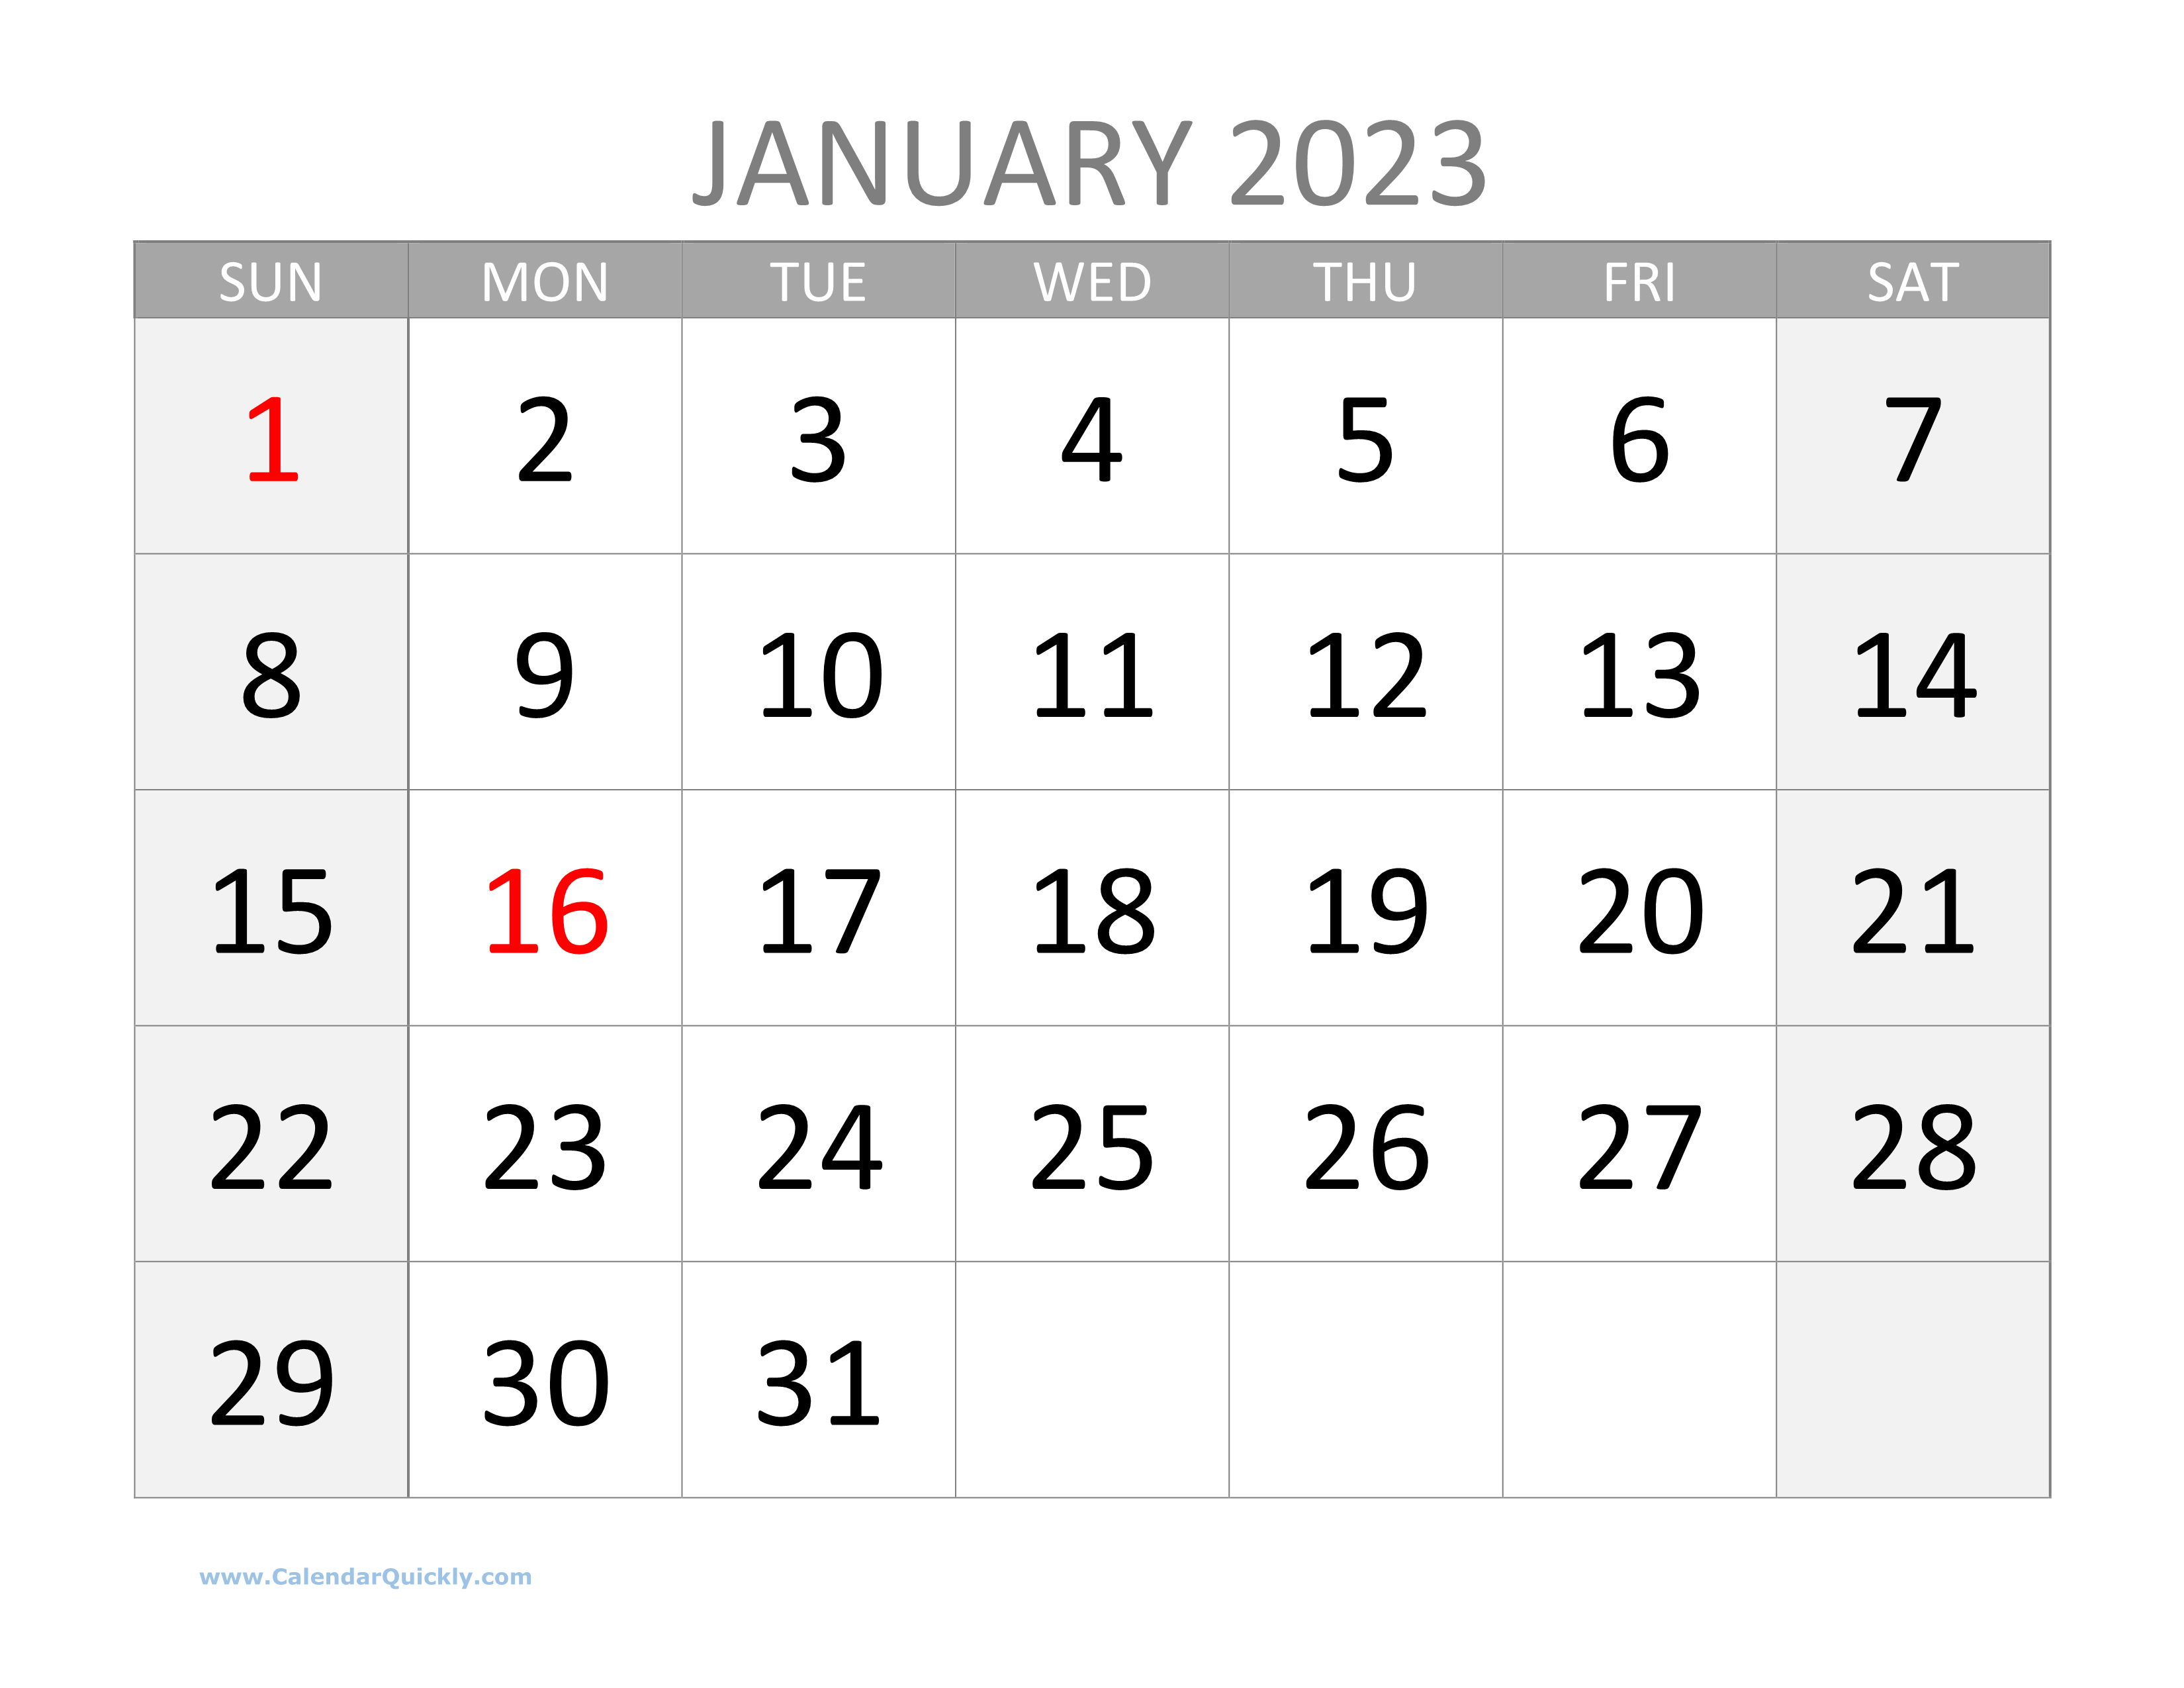 Large 2023 Calendar with Holidays | Calendar Quickly